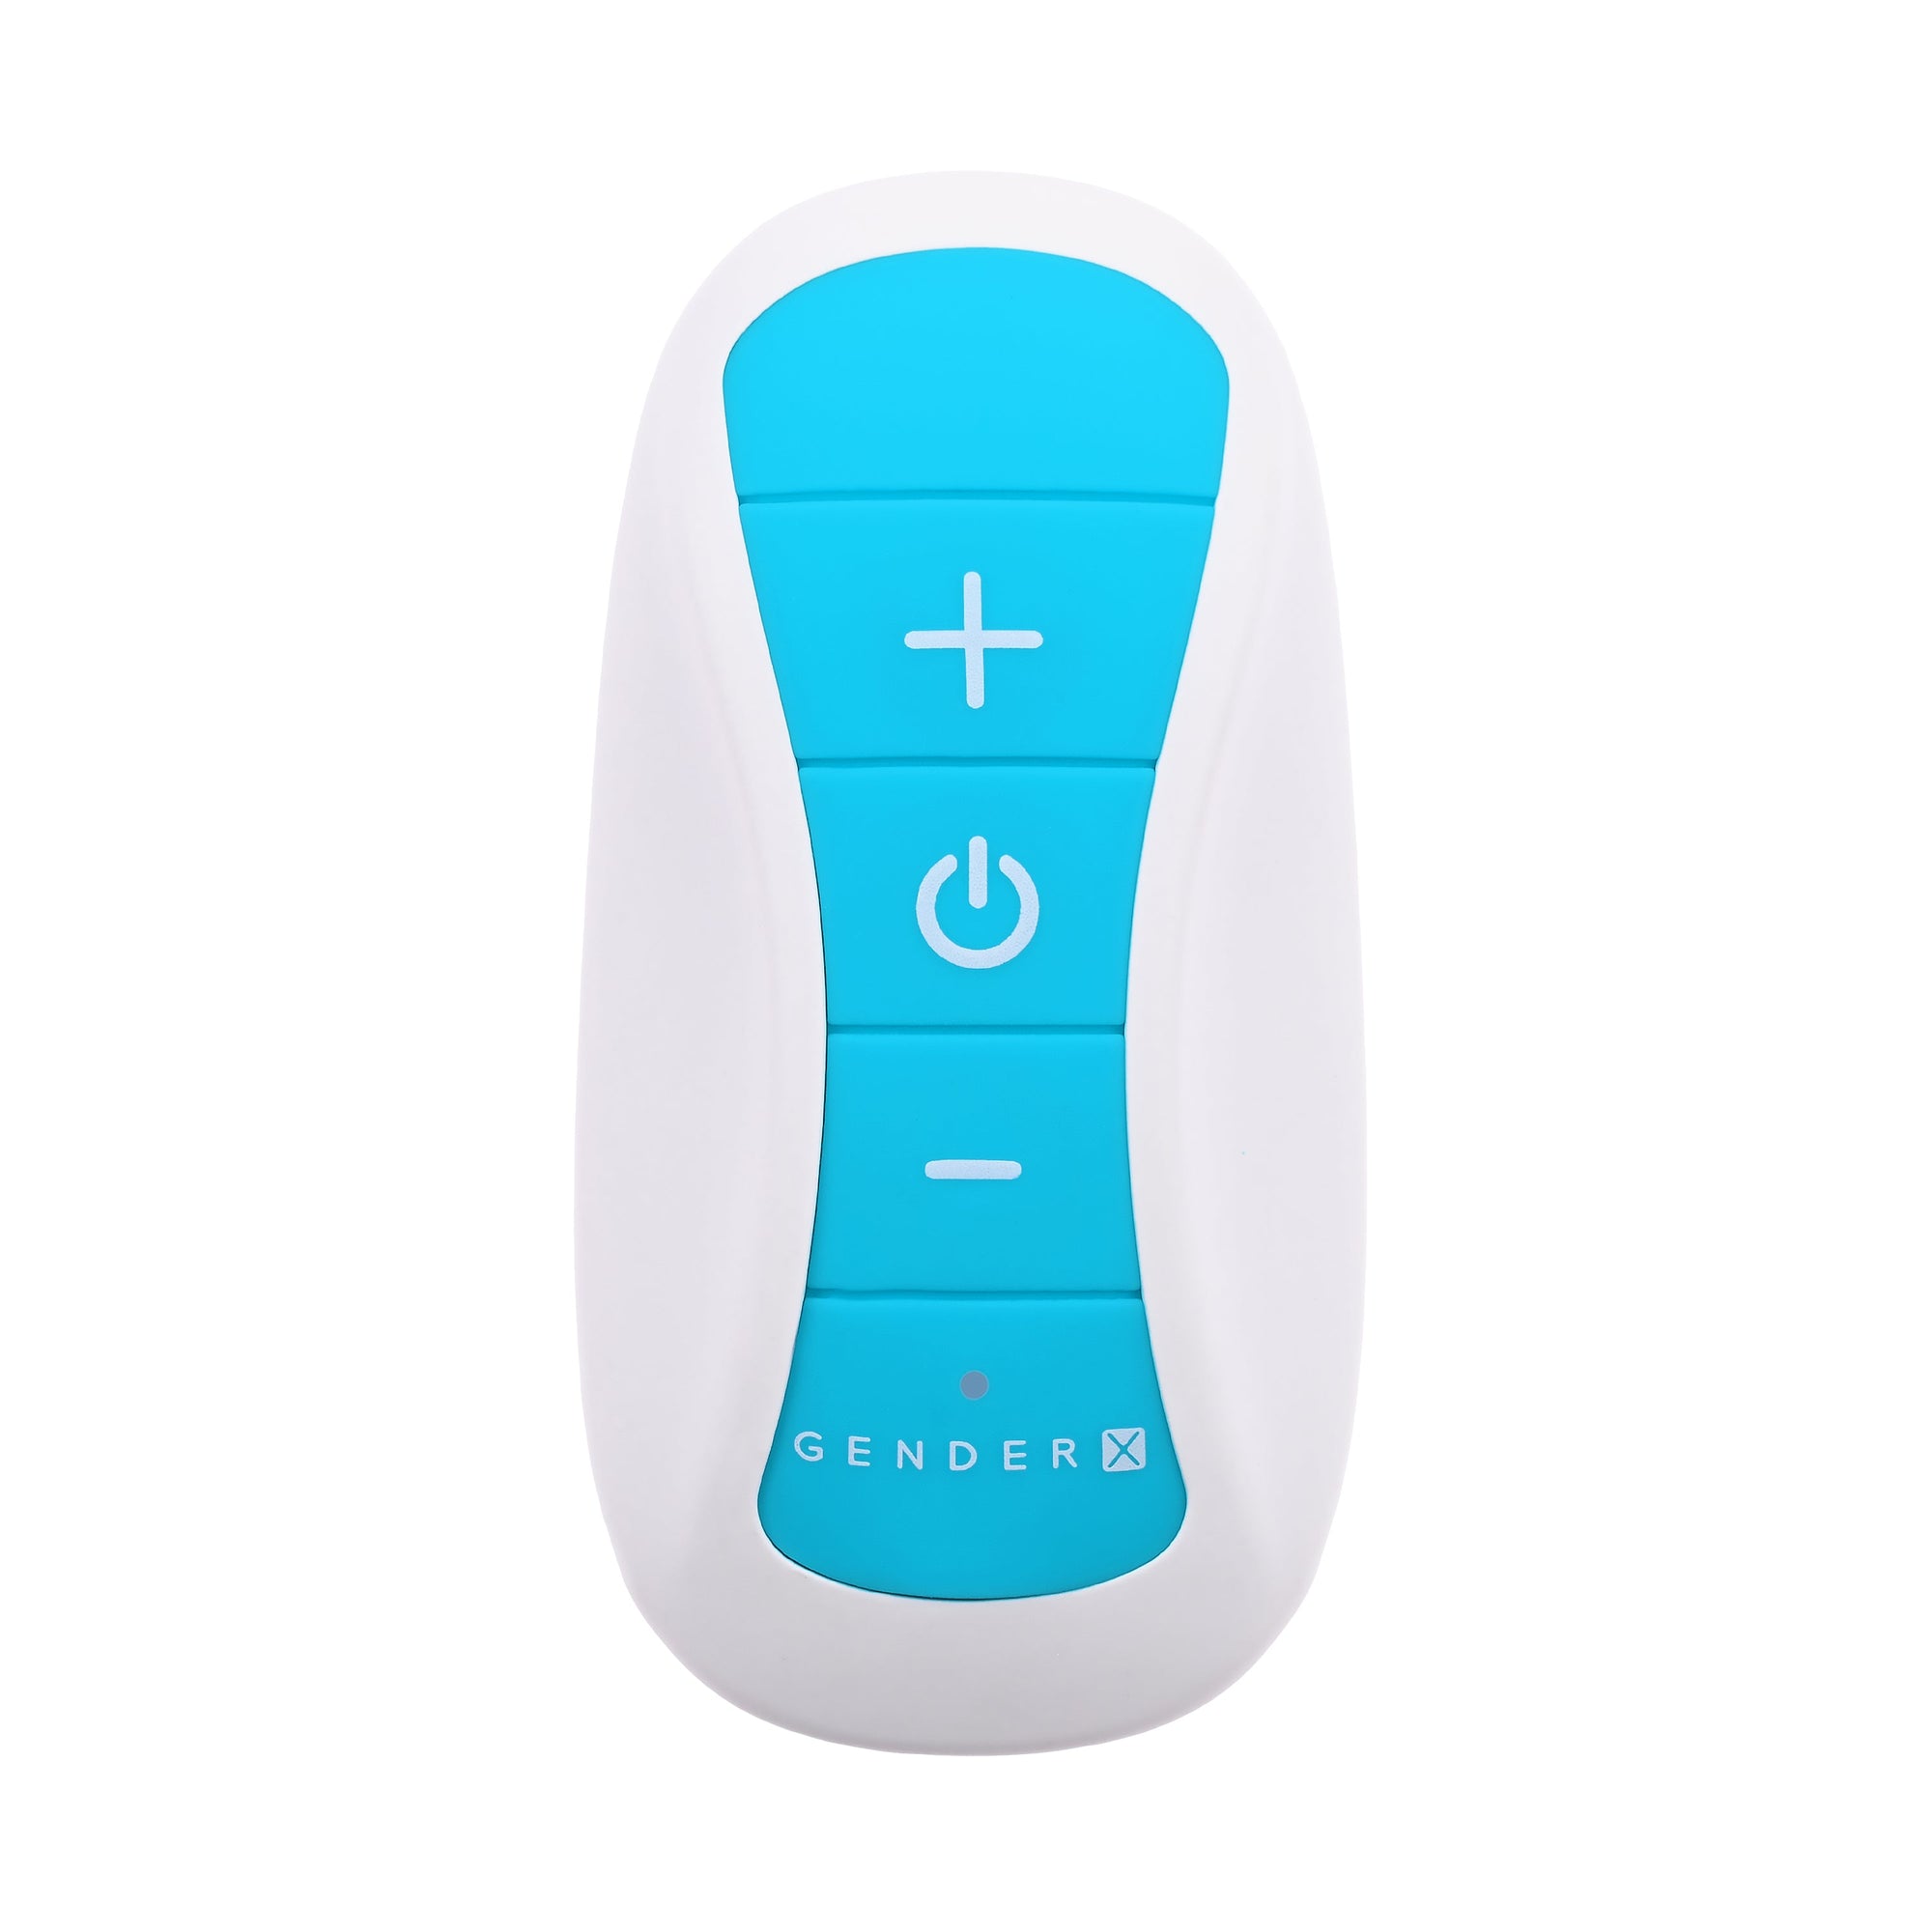 Evolved - Gender X Wear Me Out Wearable Panty Vibrator (Blue)